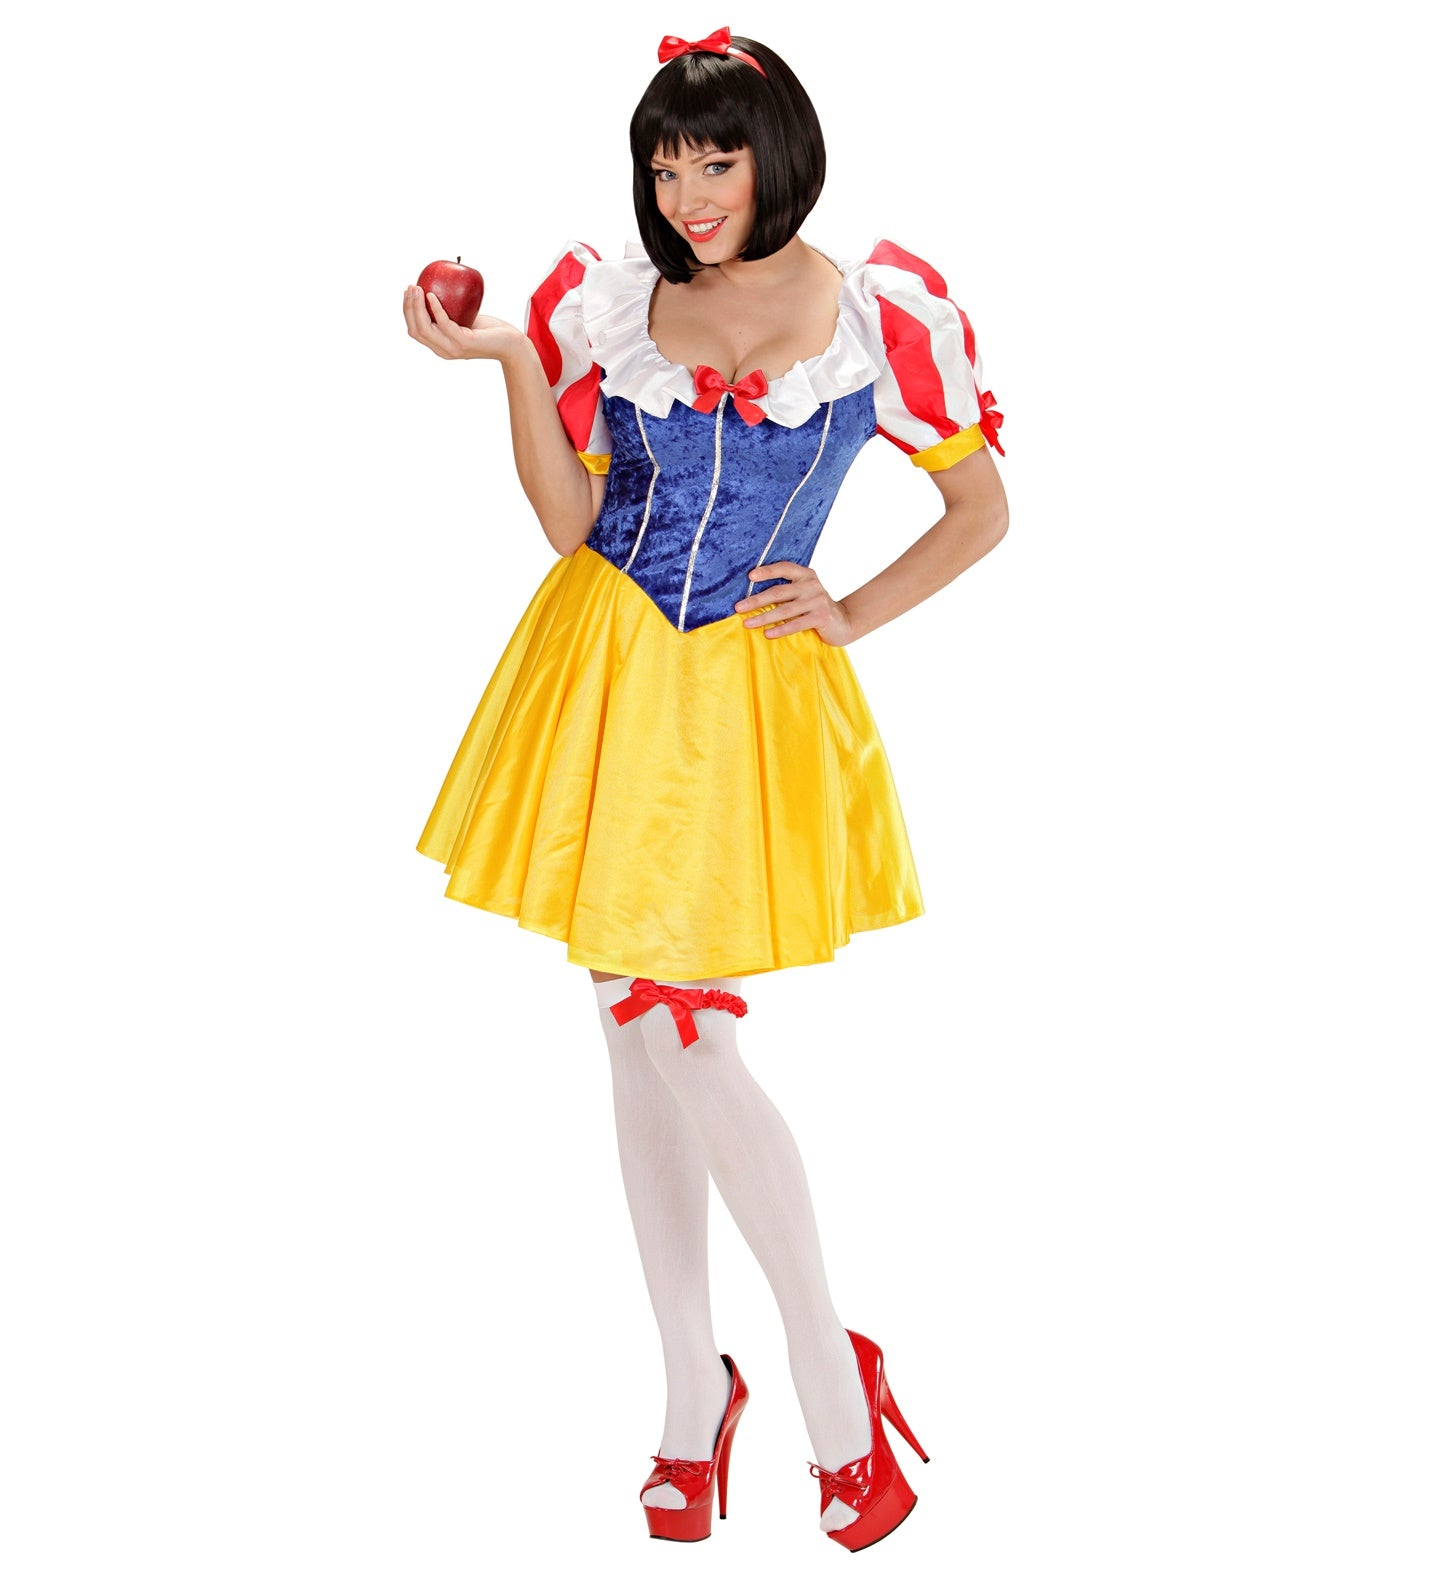 Fairytale Princess Snow White outfit for women